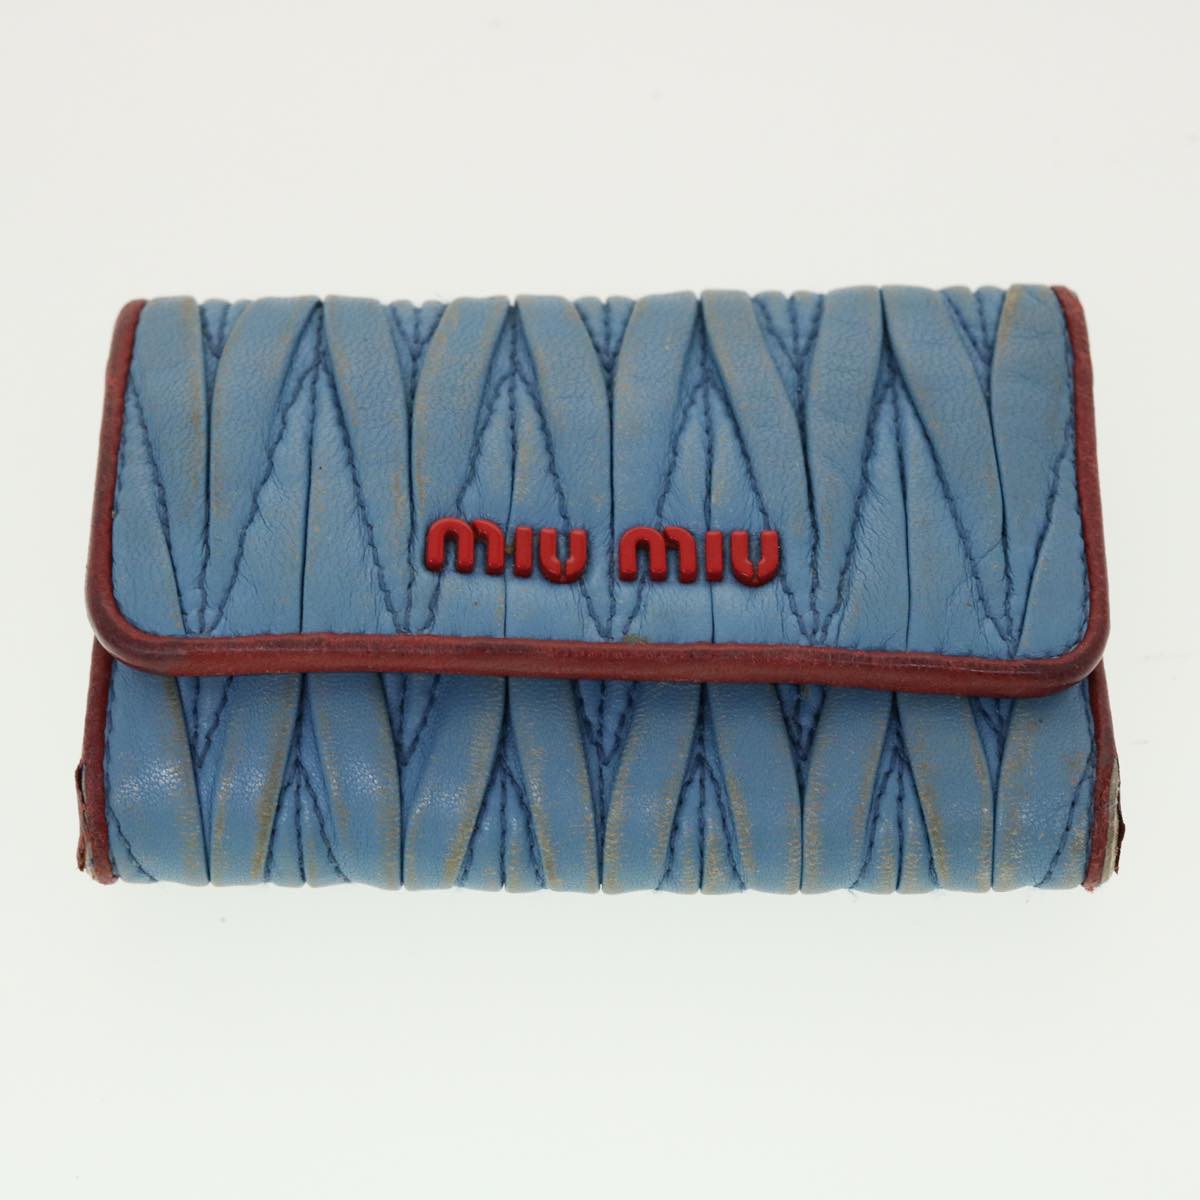 Miu Miu Key Case Wallet Leather 5Set Red Blue Green Auth bs5172